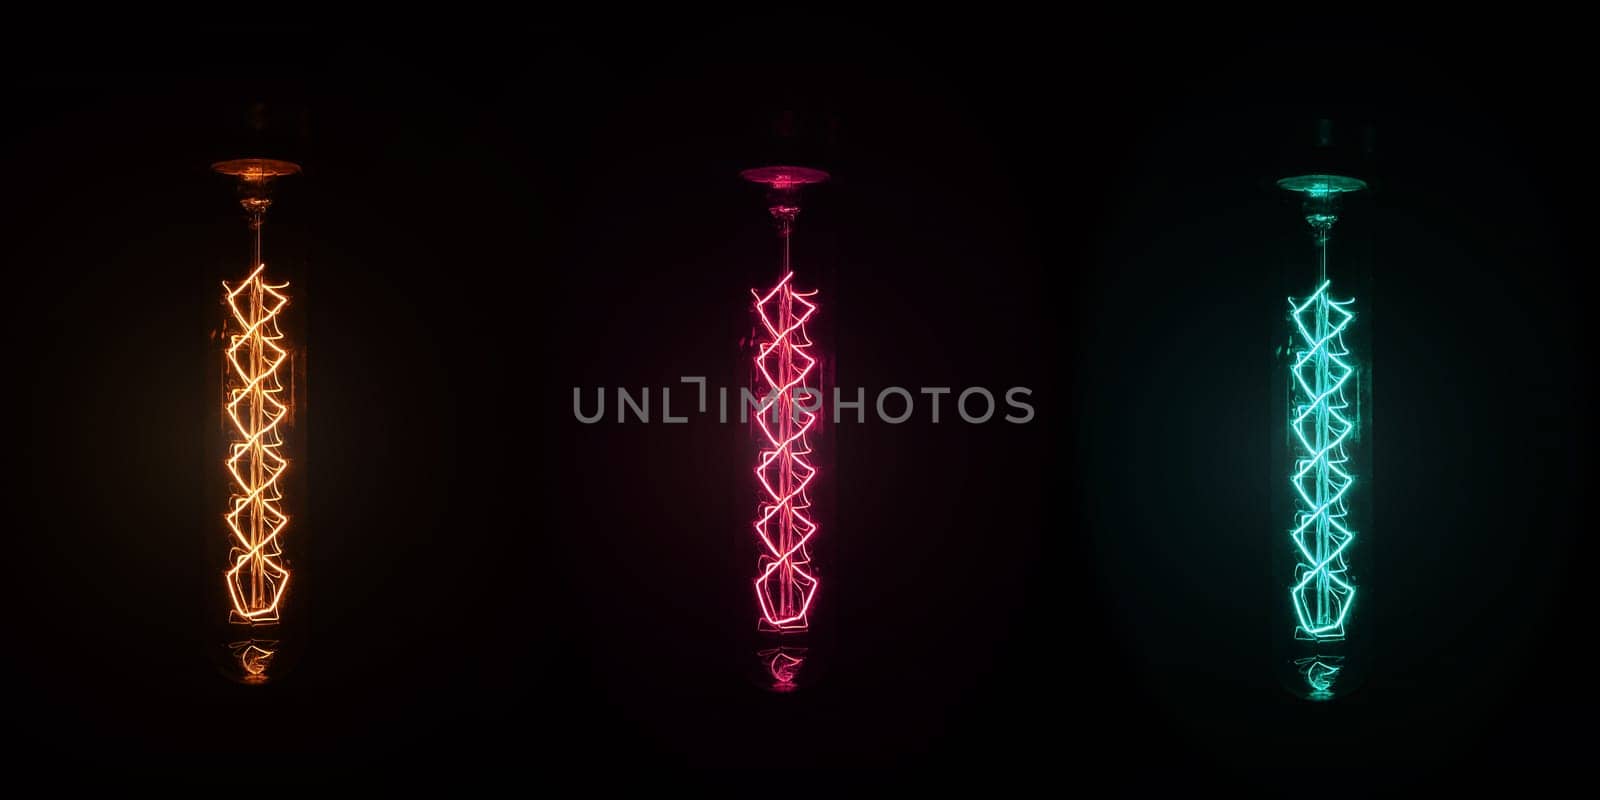 Retro looking light bulb glowing on dark background, bright wire visible in glass - colour can be changed with hue / saturation tool by Ivanko